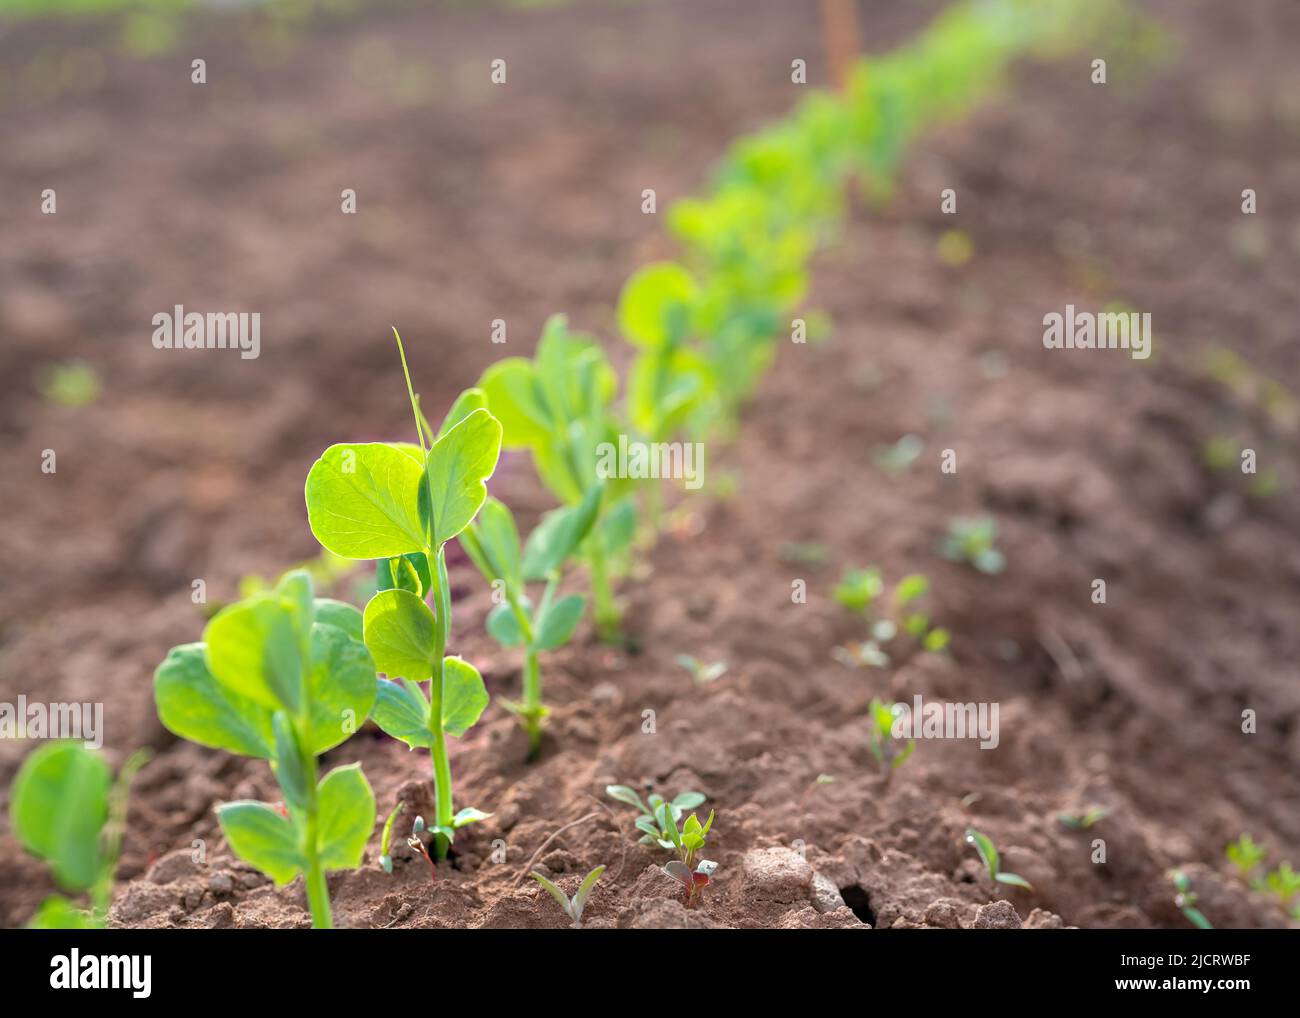 A row of young pea plants in the home garden. Stock Photo